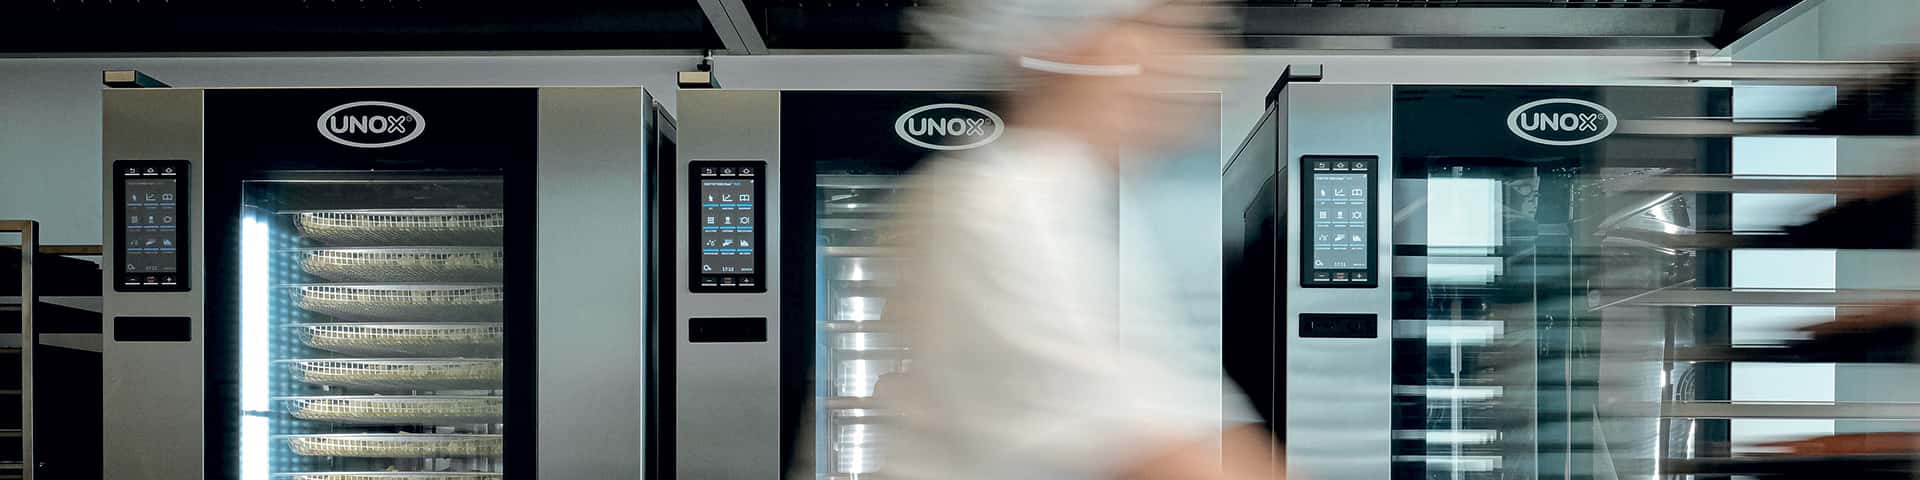 <span style="color:null"><strong>UNOX OVENS</strong></span>